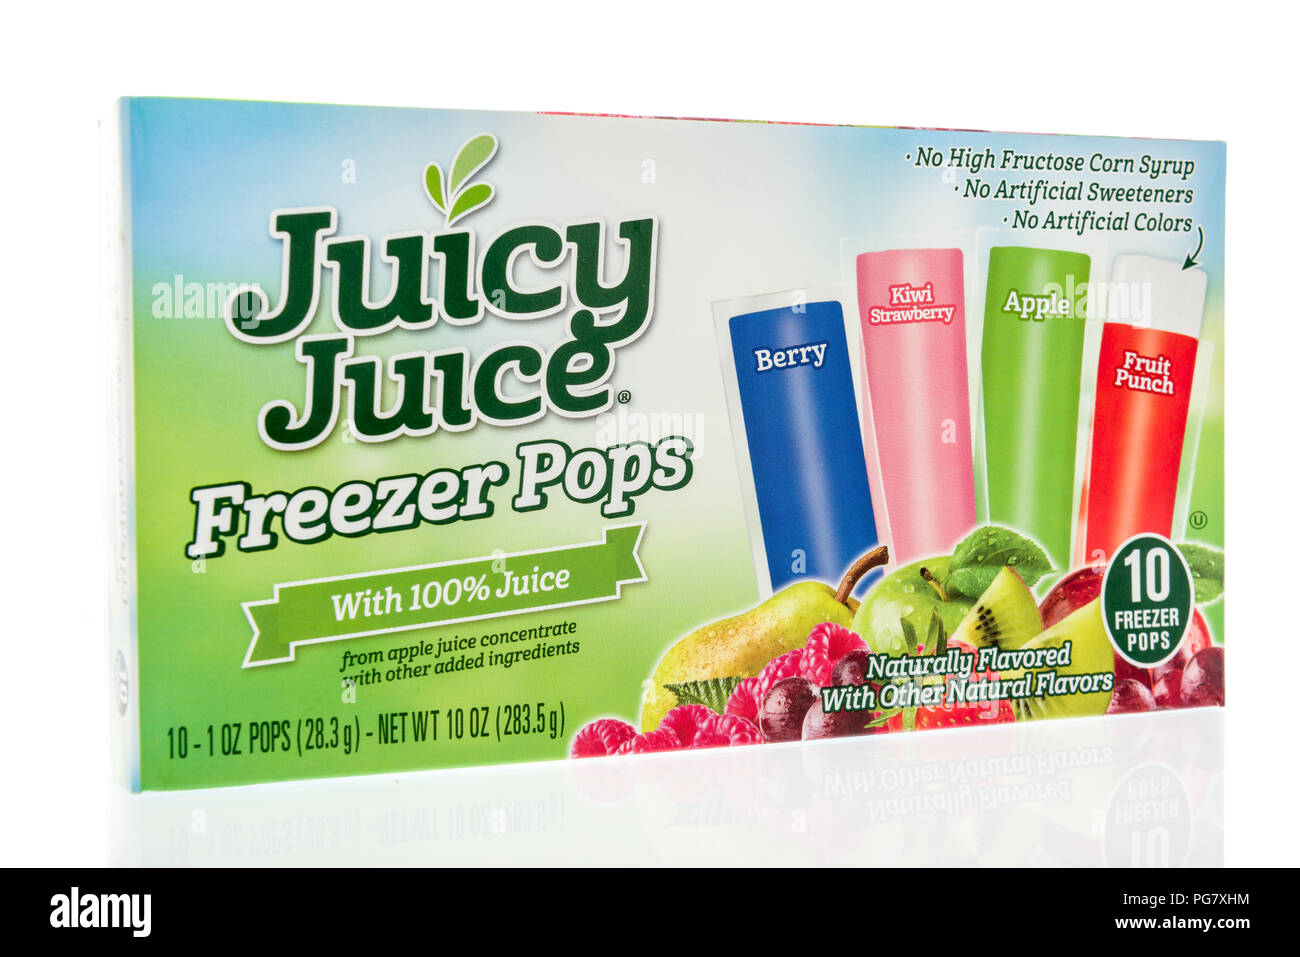 Winneconne, WI - 23 August 2018: A package of Juicy Juice freezer pops on an isolated background Stock Photo